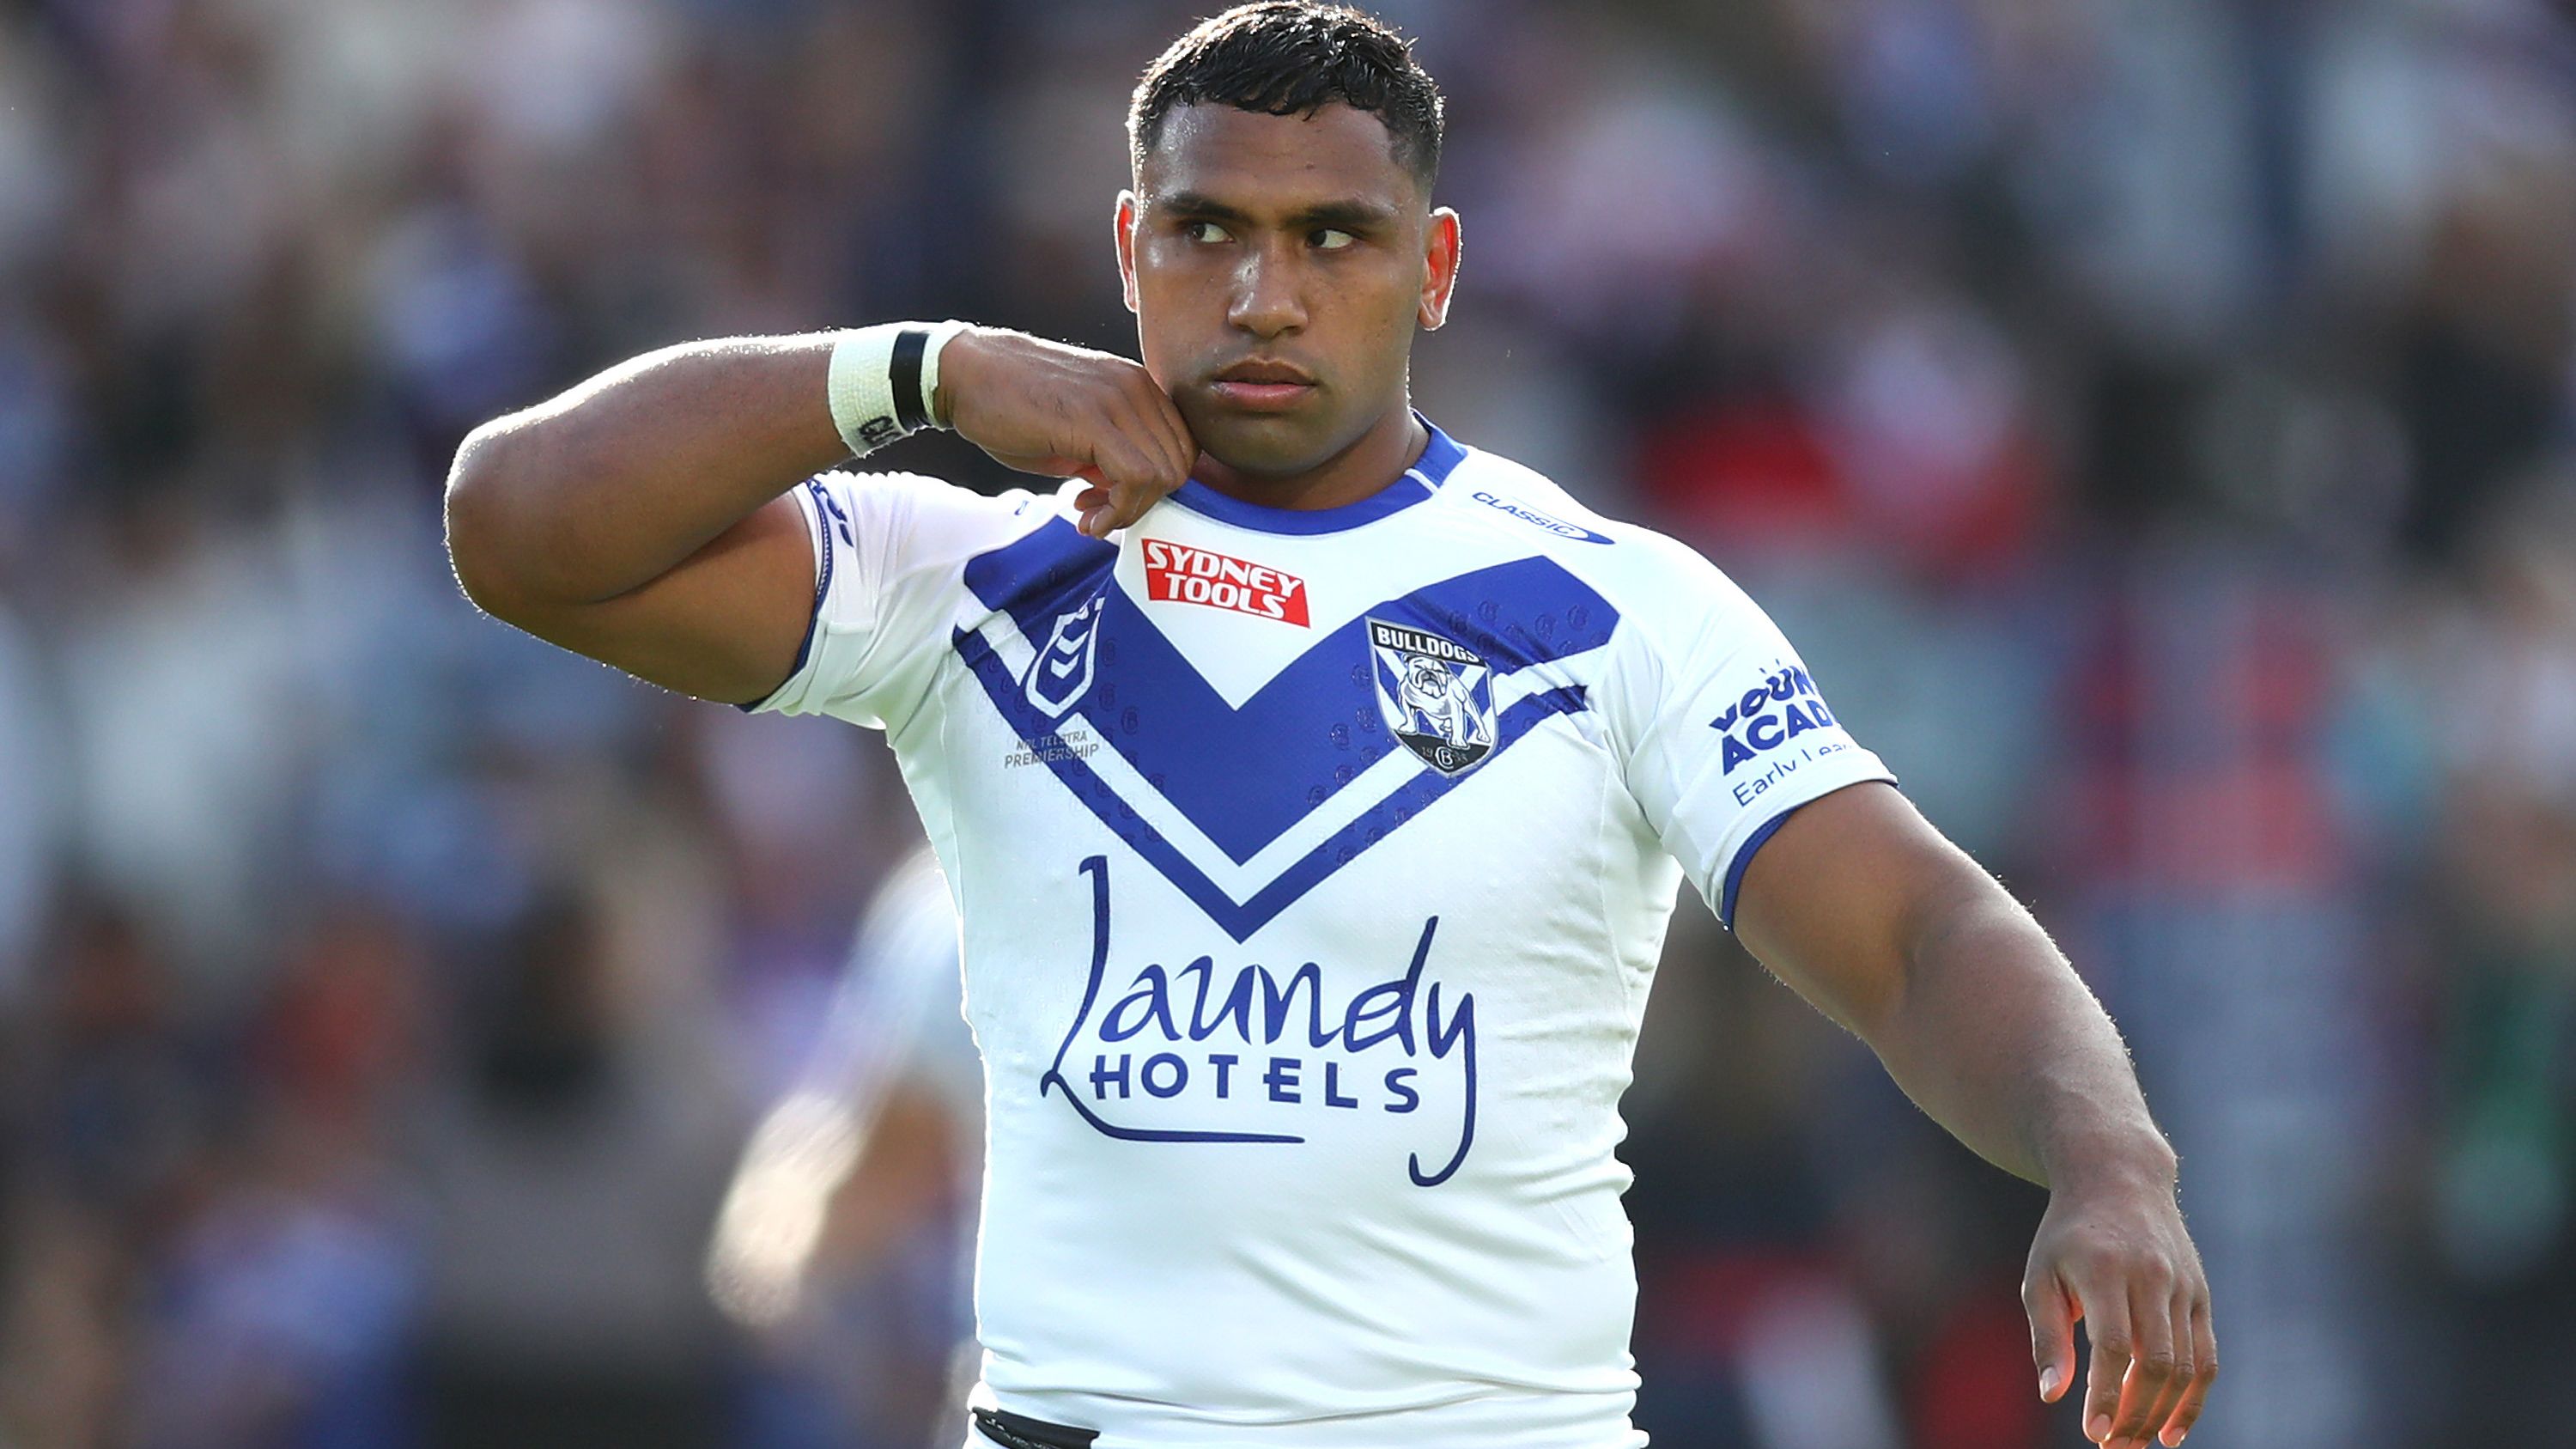 Tevita Pangai Junior of the Bulldogs looks on during the round 14 NRL match between Sydney Roosters and Canterbury Bulldogs at Central Coast Stadium on June 04, 2023 in Gosford, Australia. (Photo by Jason McCawley/Getty Images)